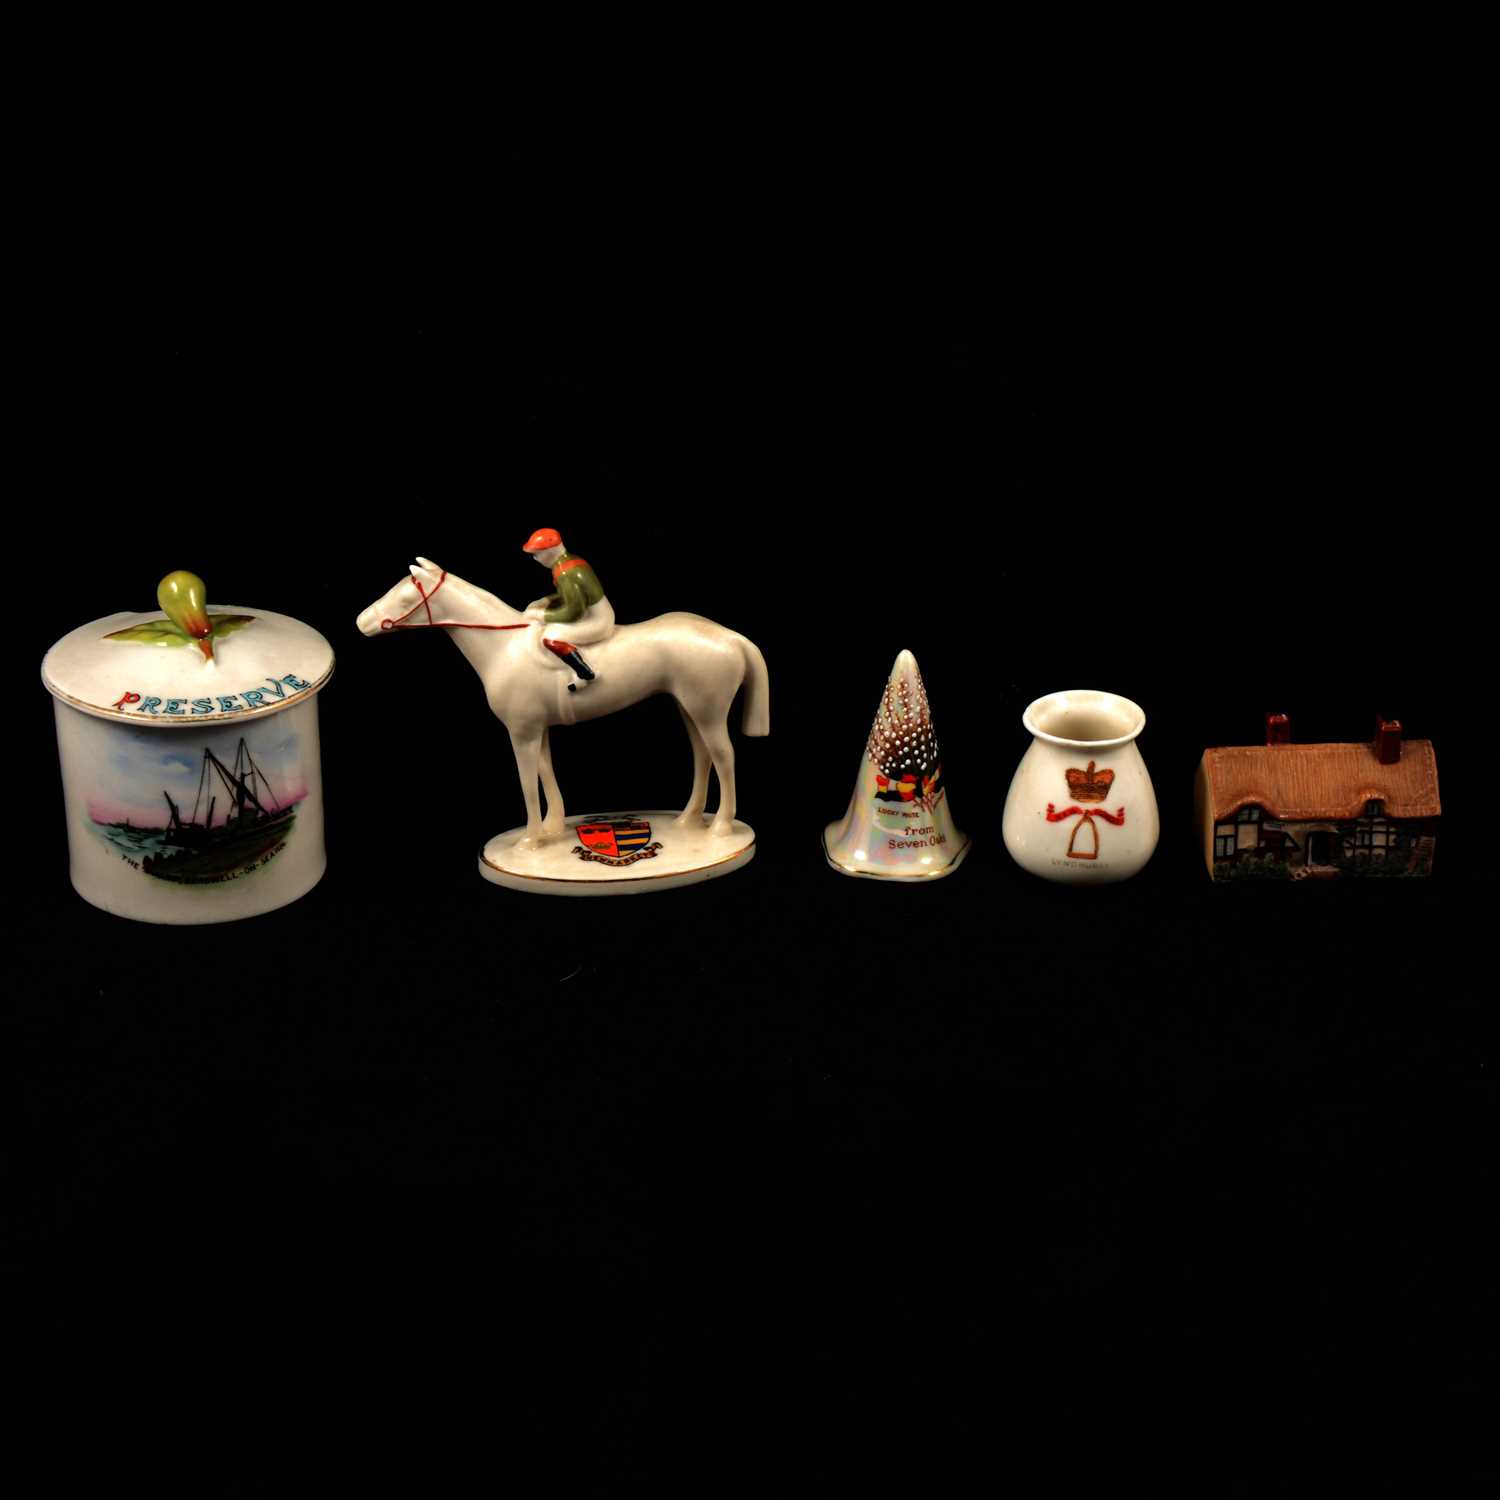 Lot 24 - Goss crested china model of a racehorse and jockey, and other crested china